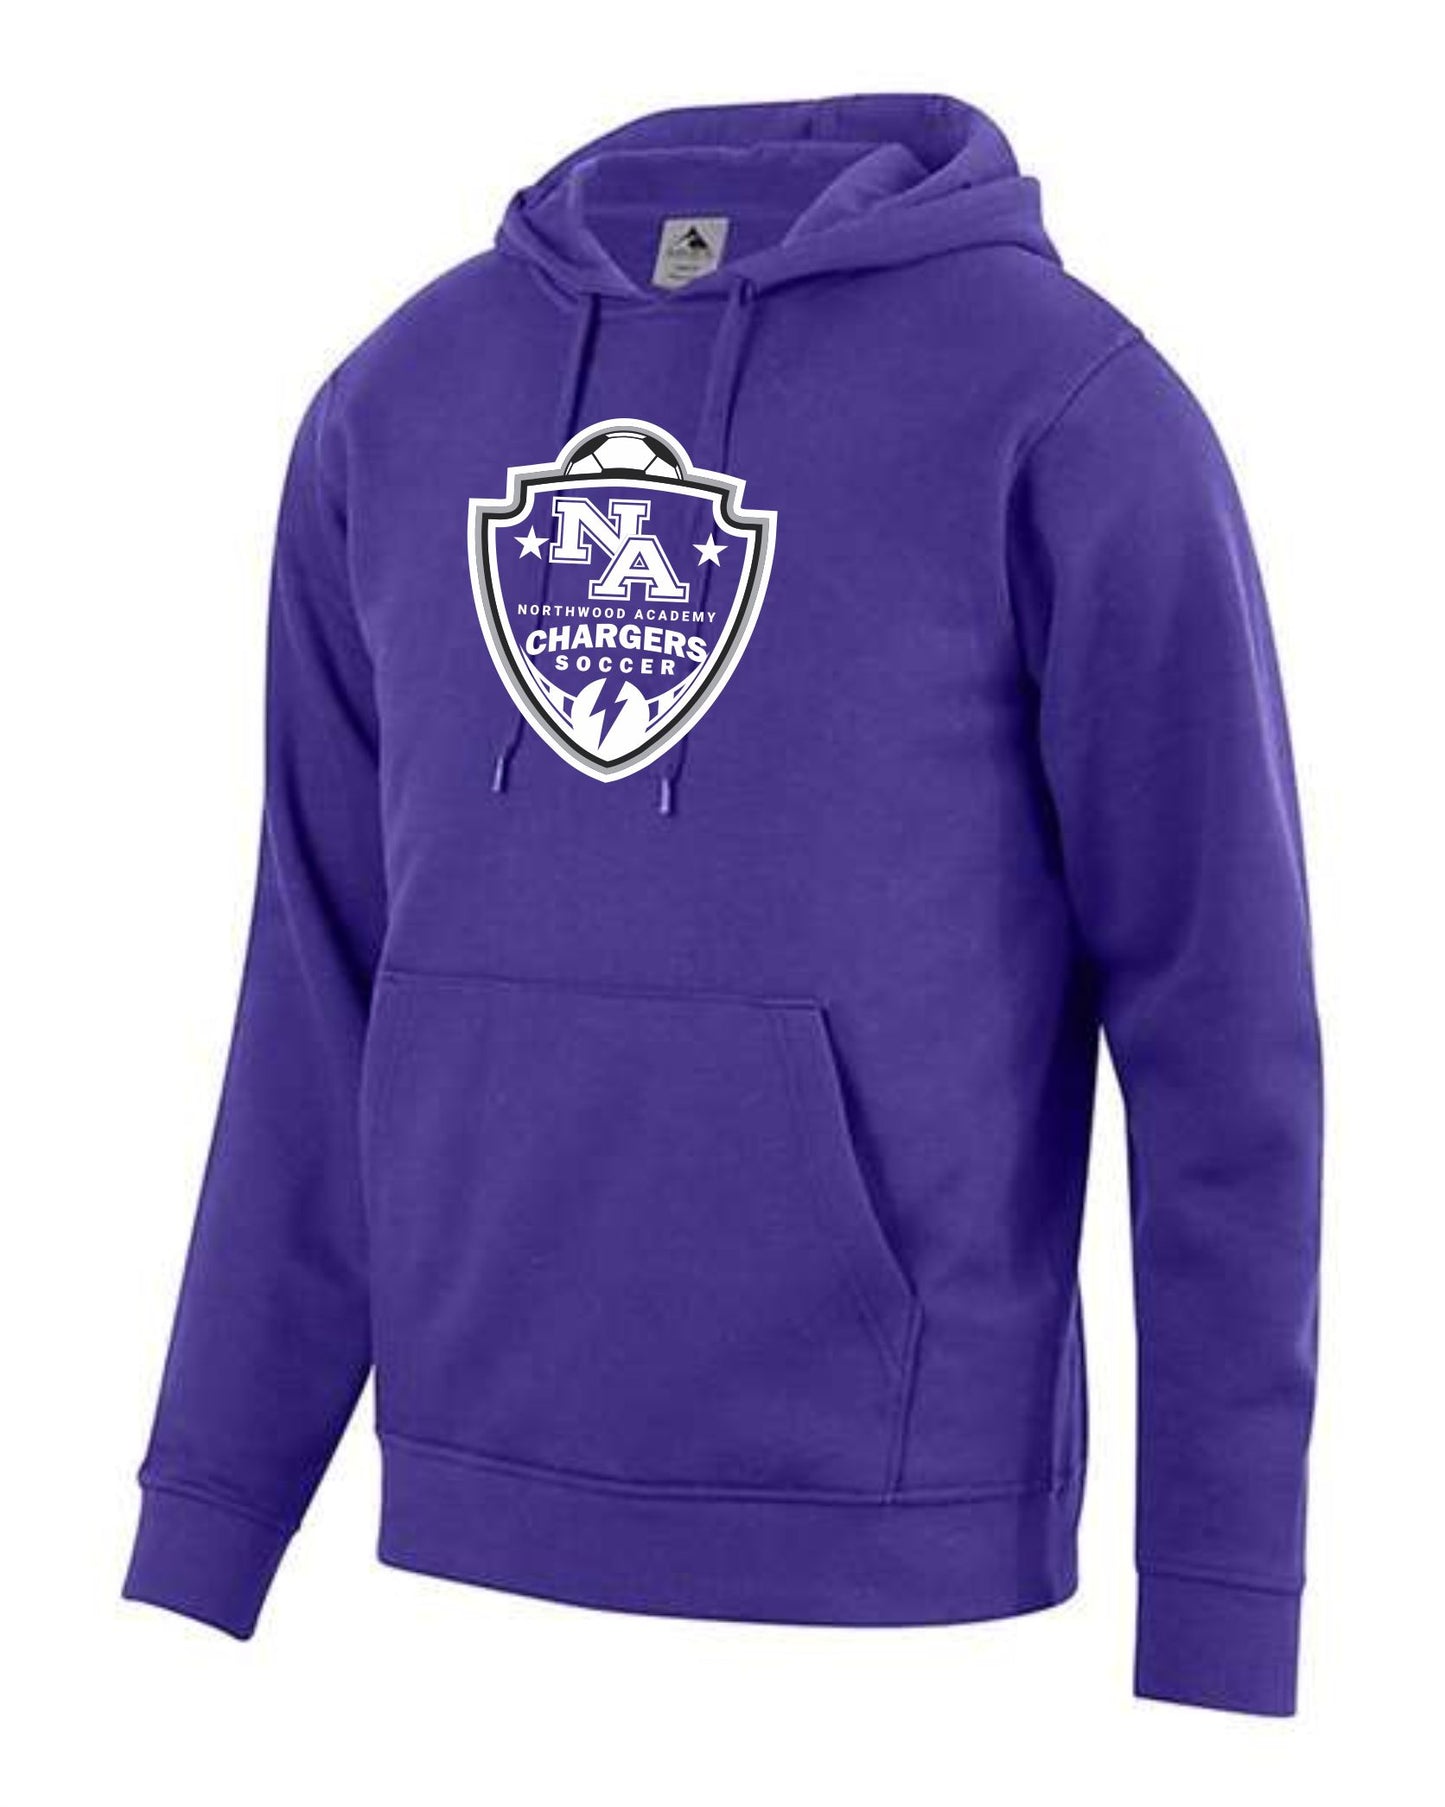 Soccer Hoodie Approved School Attire